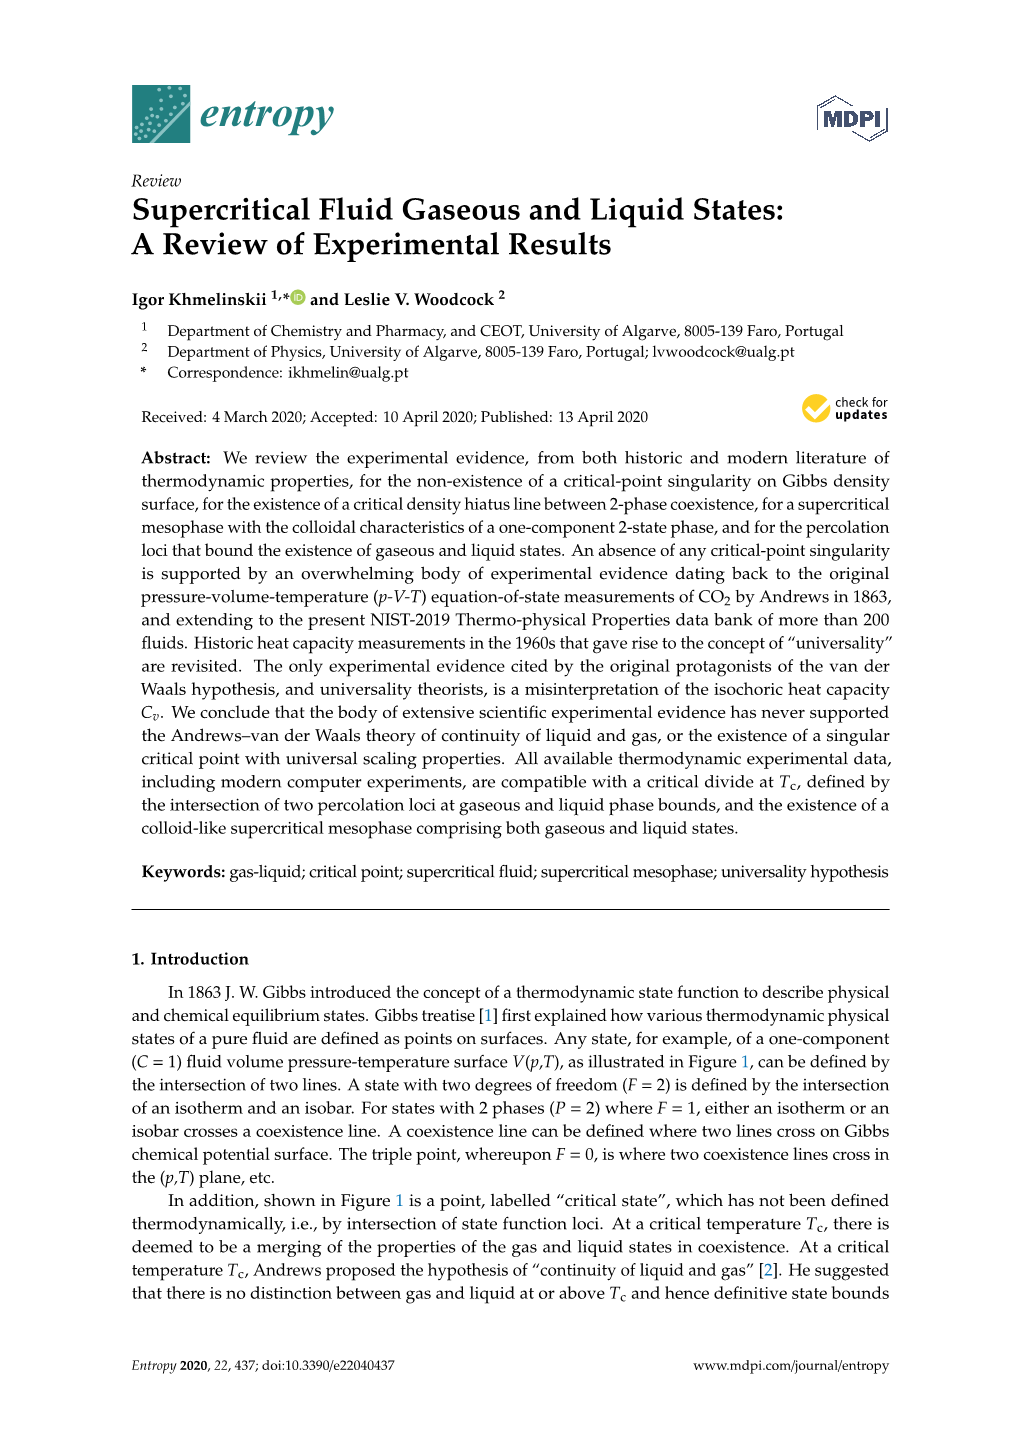 Supercritical Fluid Gaseous and Liquid States: a Review of Experimental Results